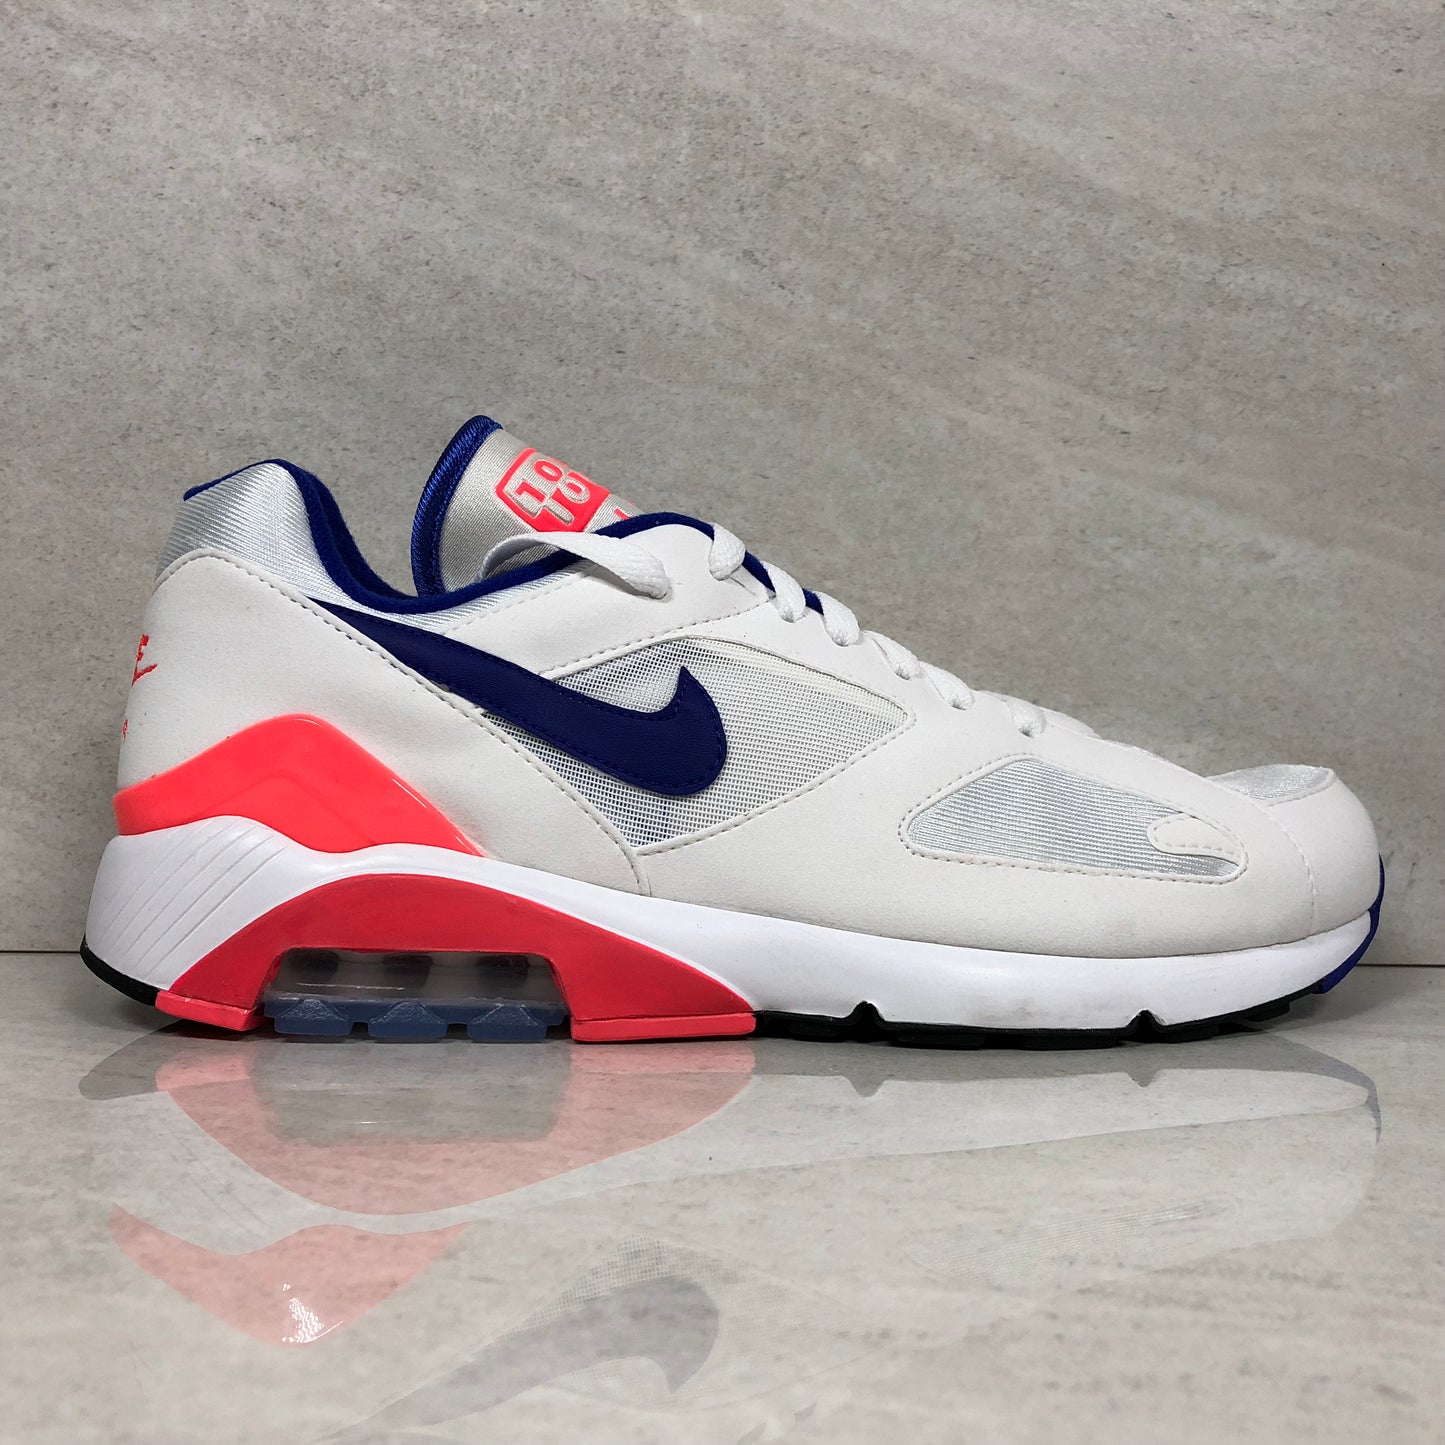 Nike Air Max 180 pour homme, blanc/ultramarine-rouge solaire, 13 M US